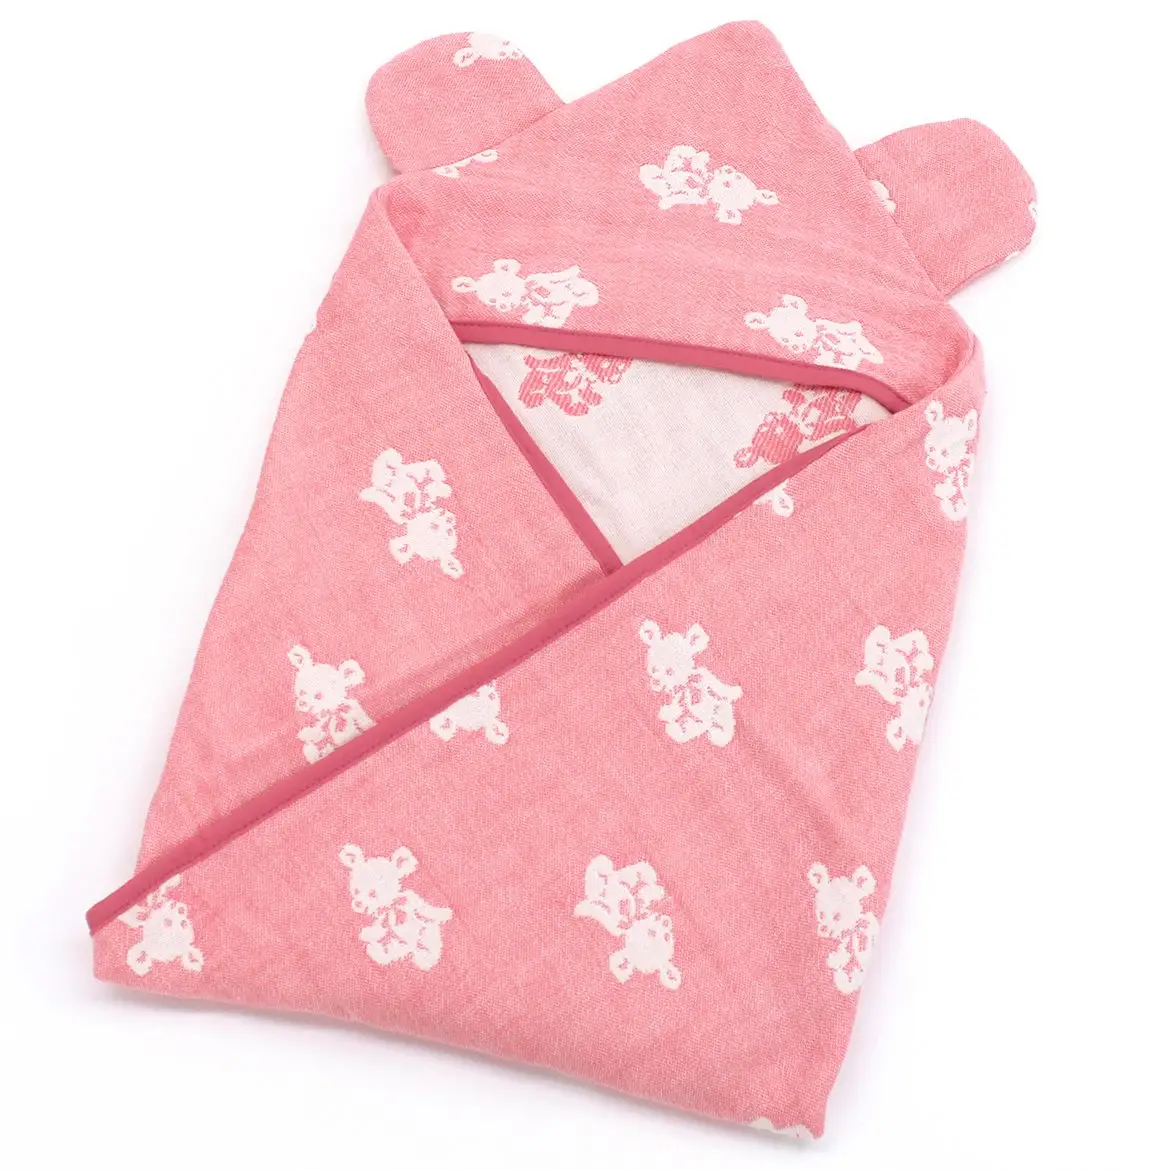 4 layer gauze swaddling clothes with hood. made in Japan cotton 100% Hooded Baby swaddle blanket Pink